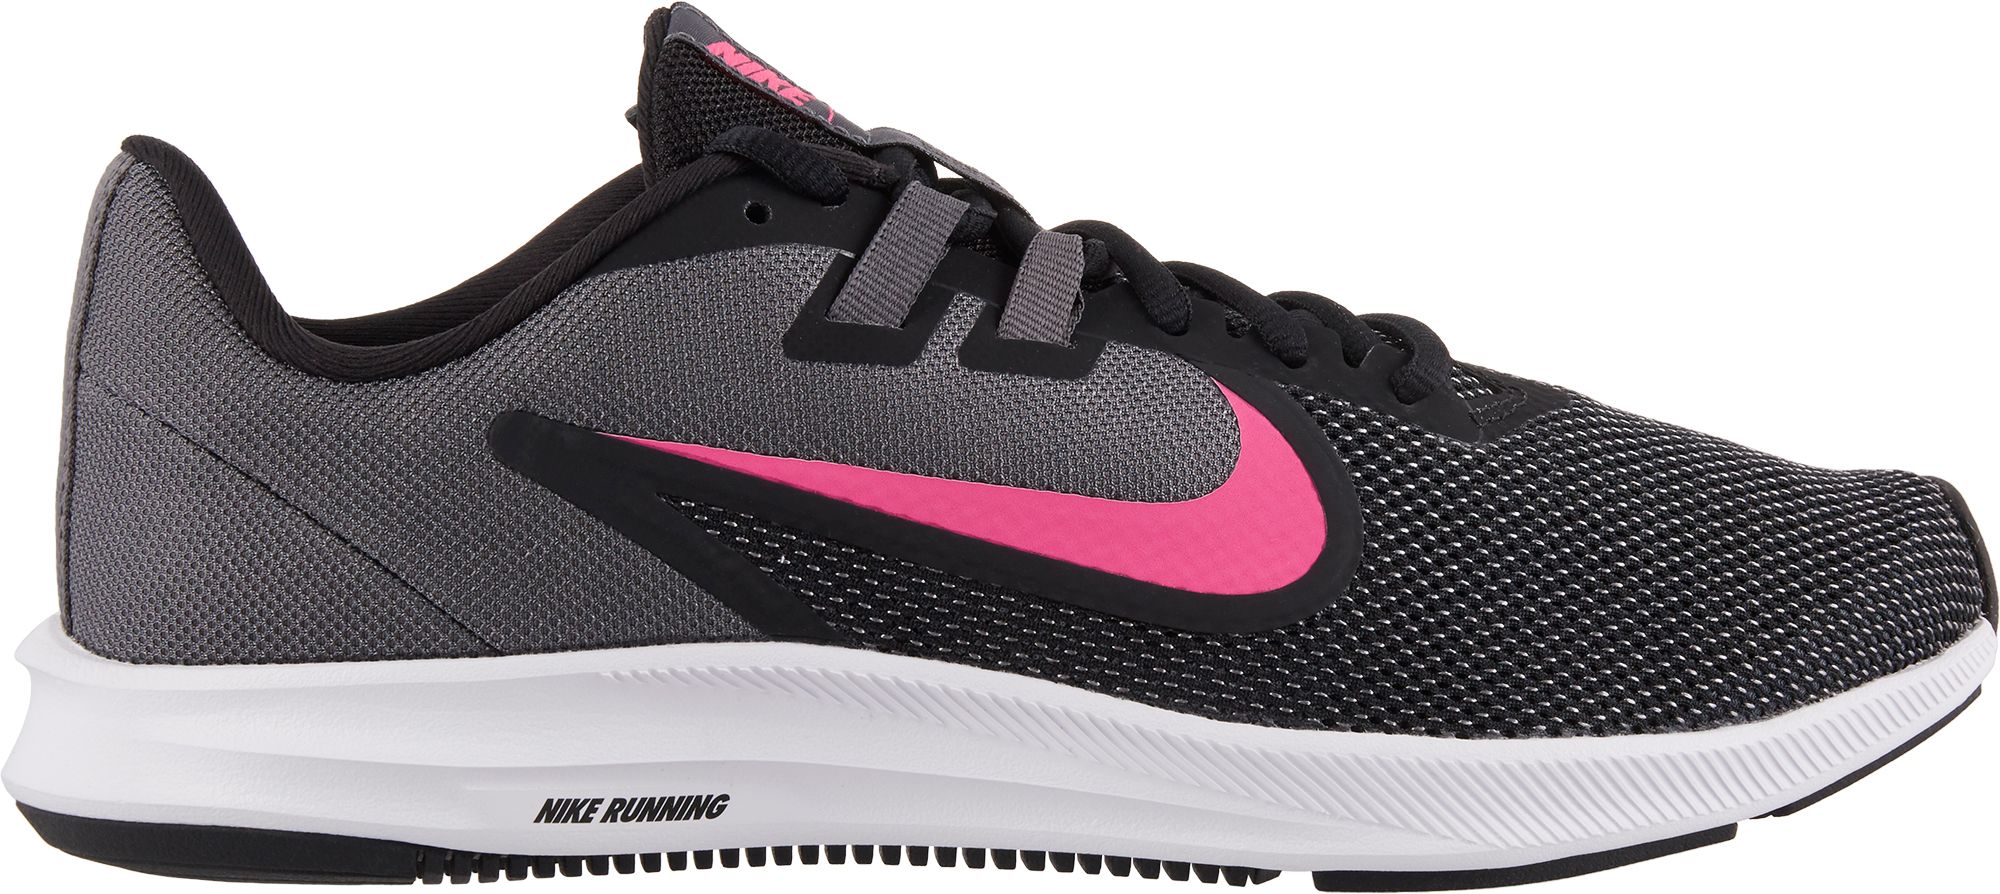 nike running shoes pink and black